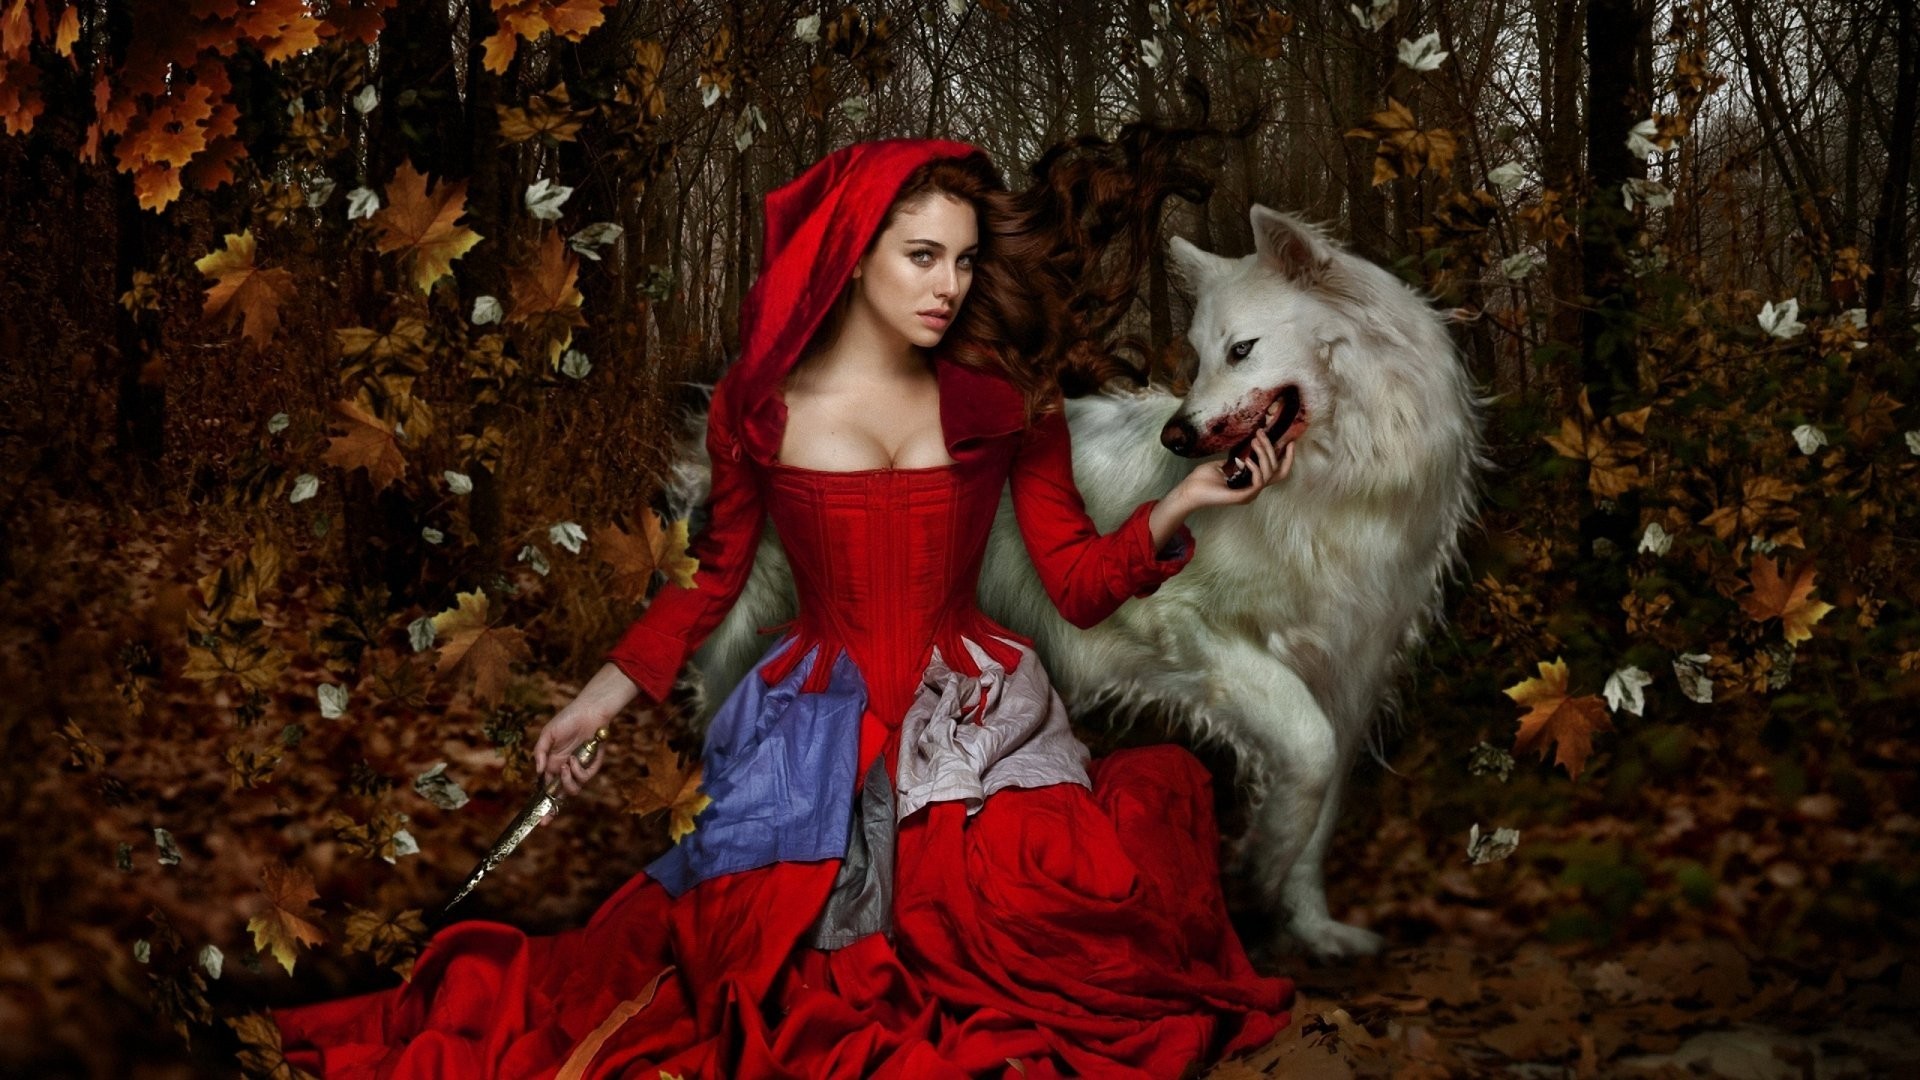 1920x1080 Fantasy - Red Riding Hood Fantasy Girl Woman Knife Wolf Forest Fa...